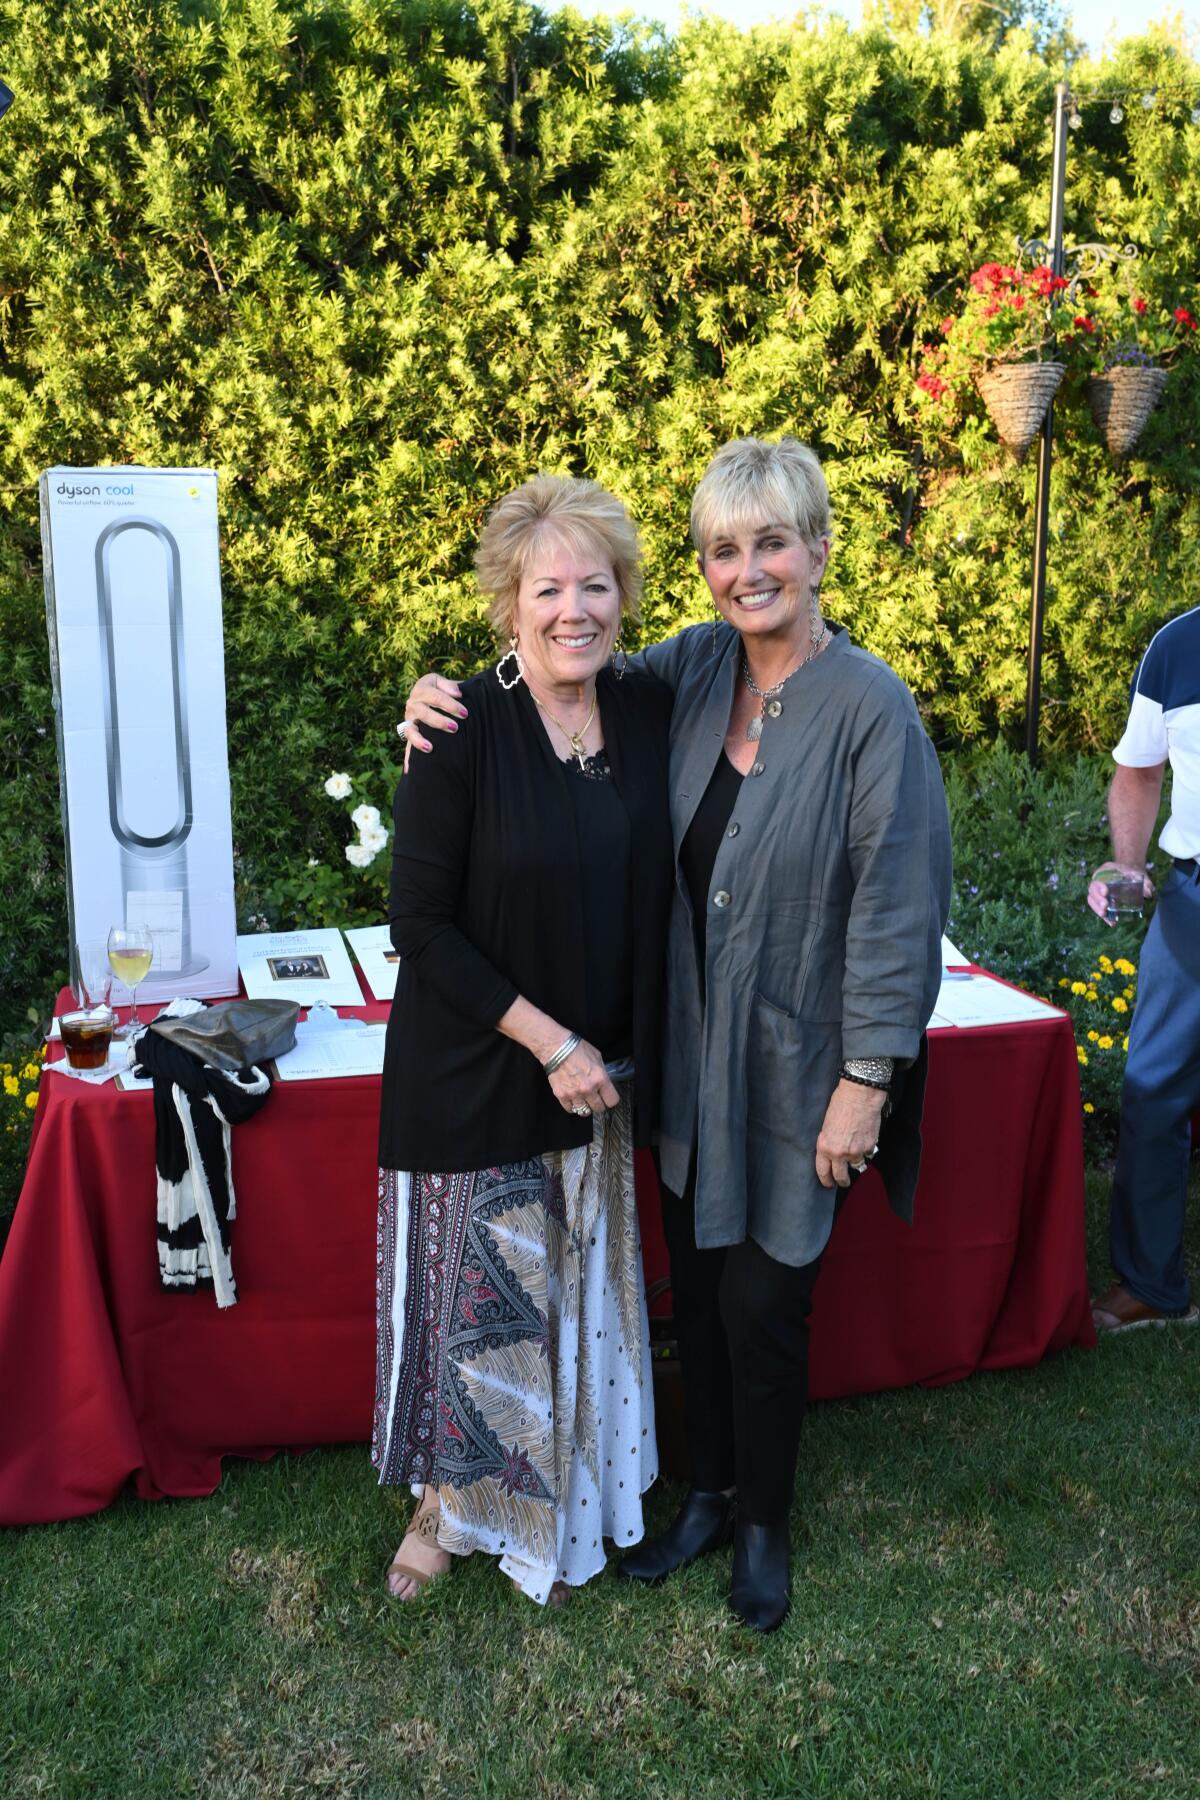 Becky Baylor and Kristi DeCinces attend the Don Baylor 65 Roses Memorial Classic held at Strawberry Farms Golf Club.